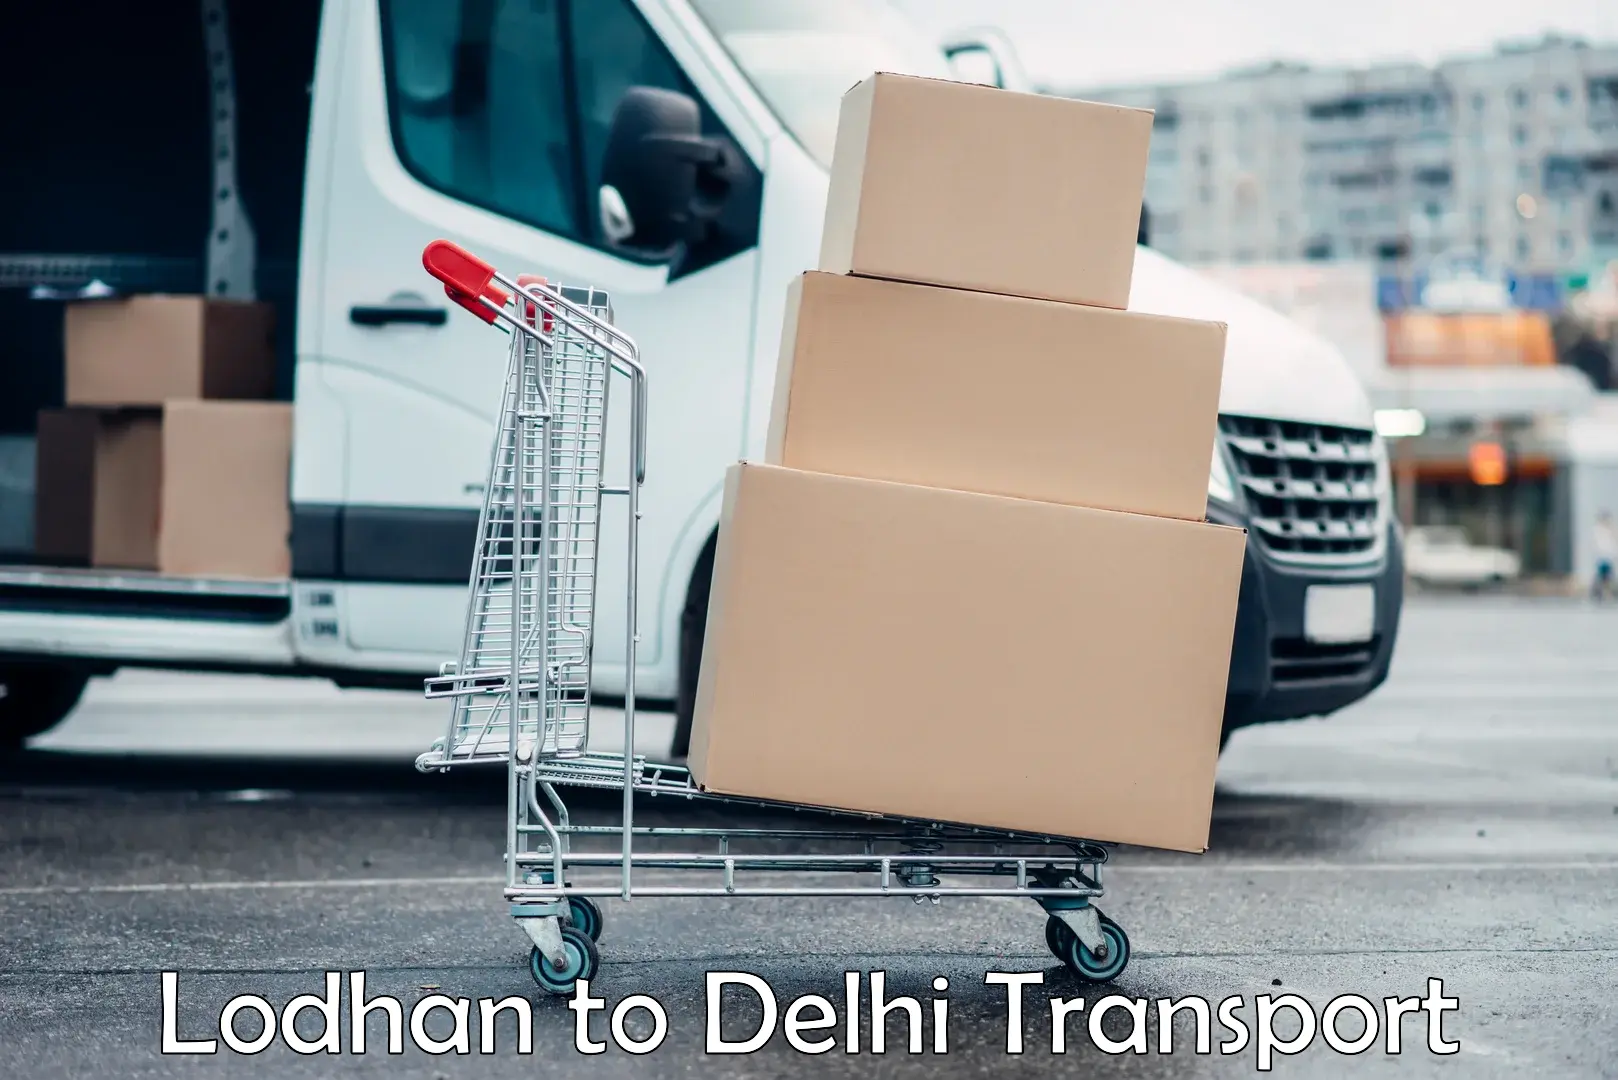 Container transport service Lodhan to University of Delhi